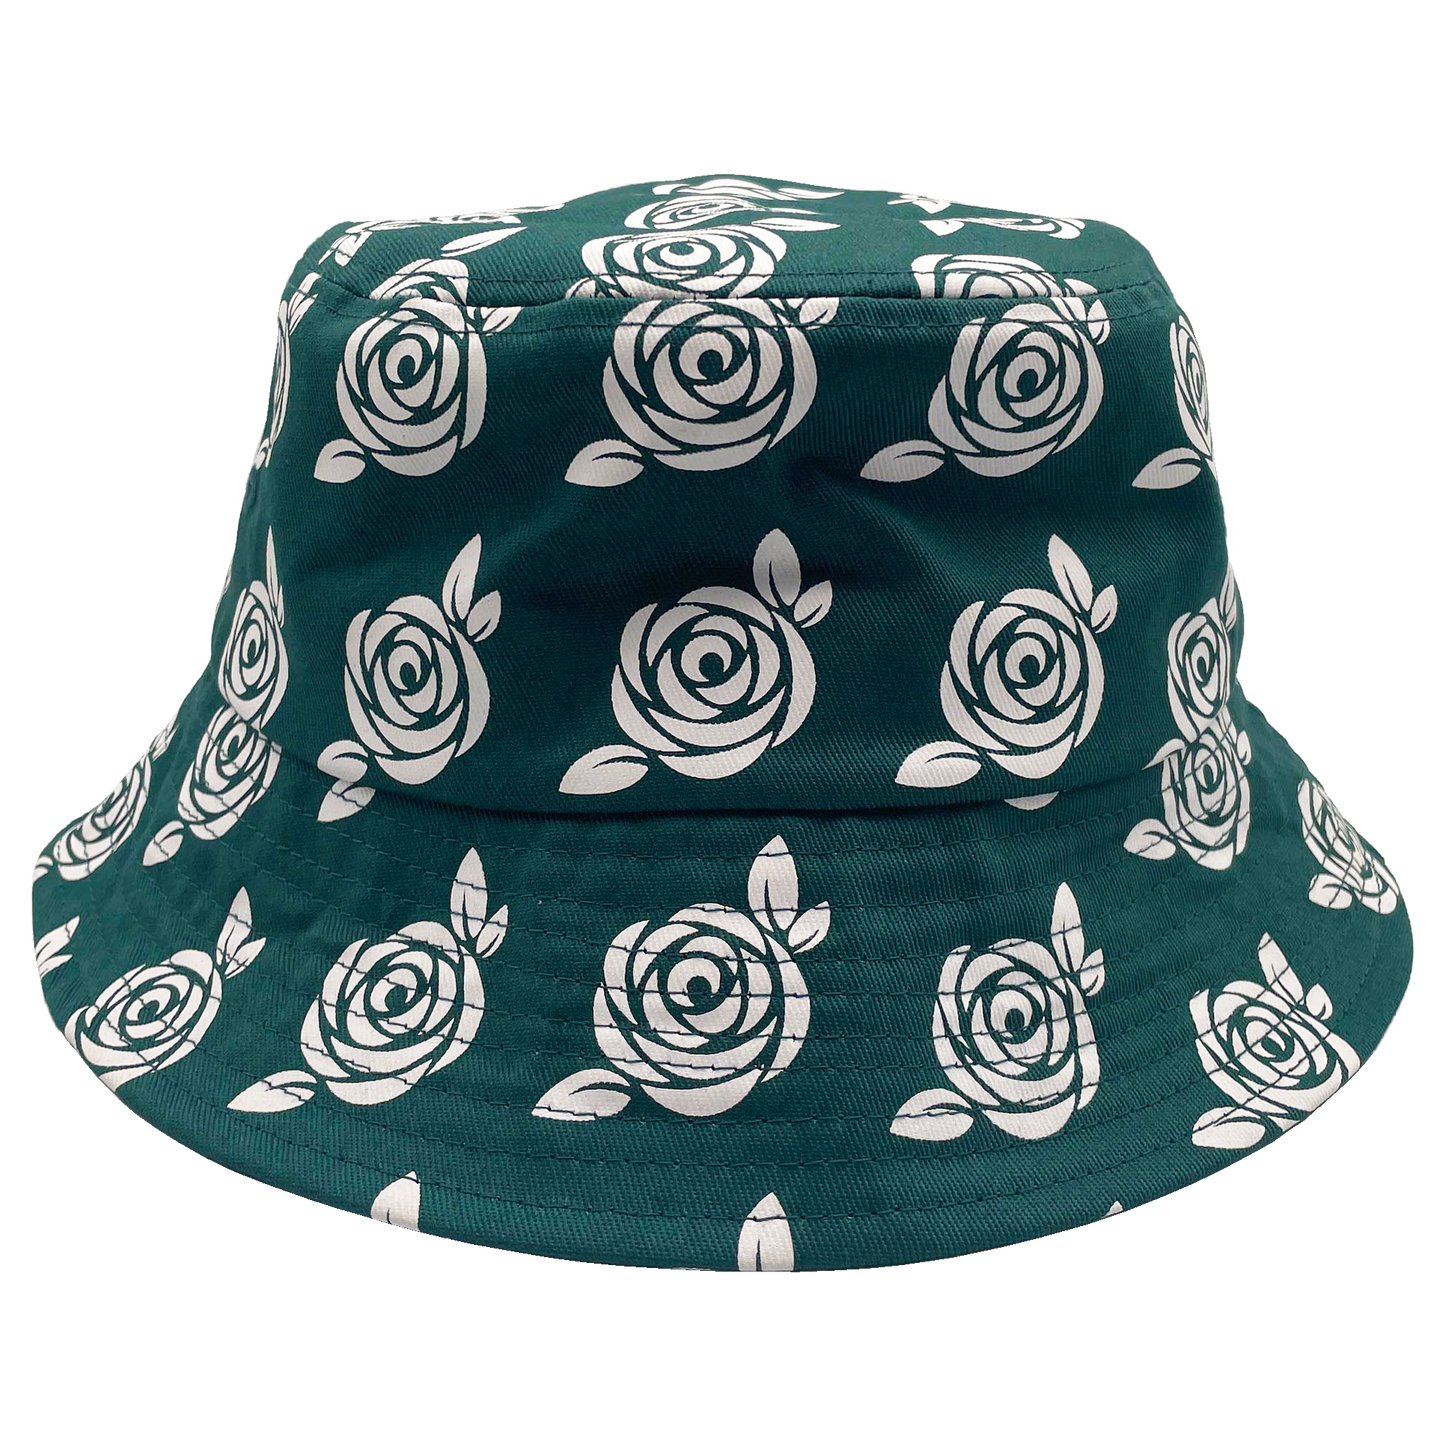 Could Be Gayer Dark Green Bucket Hat